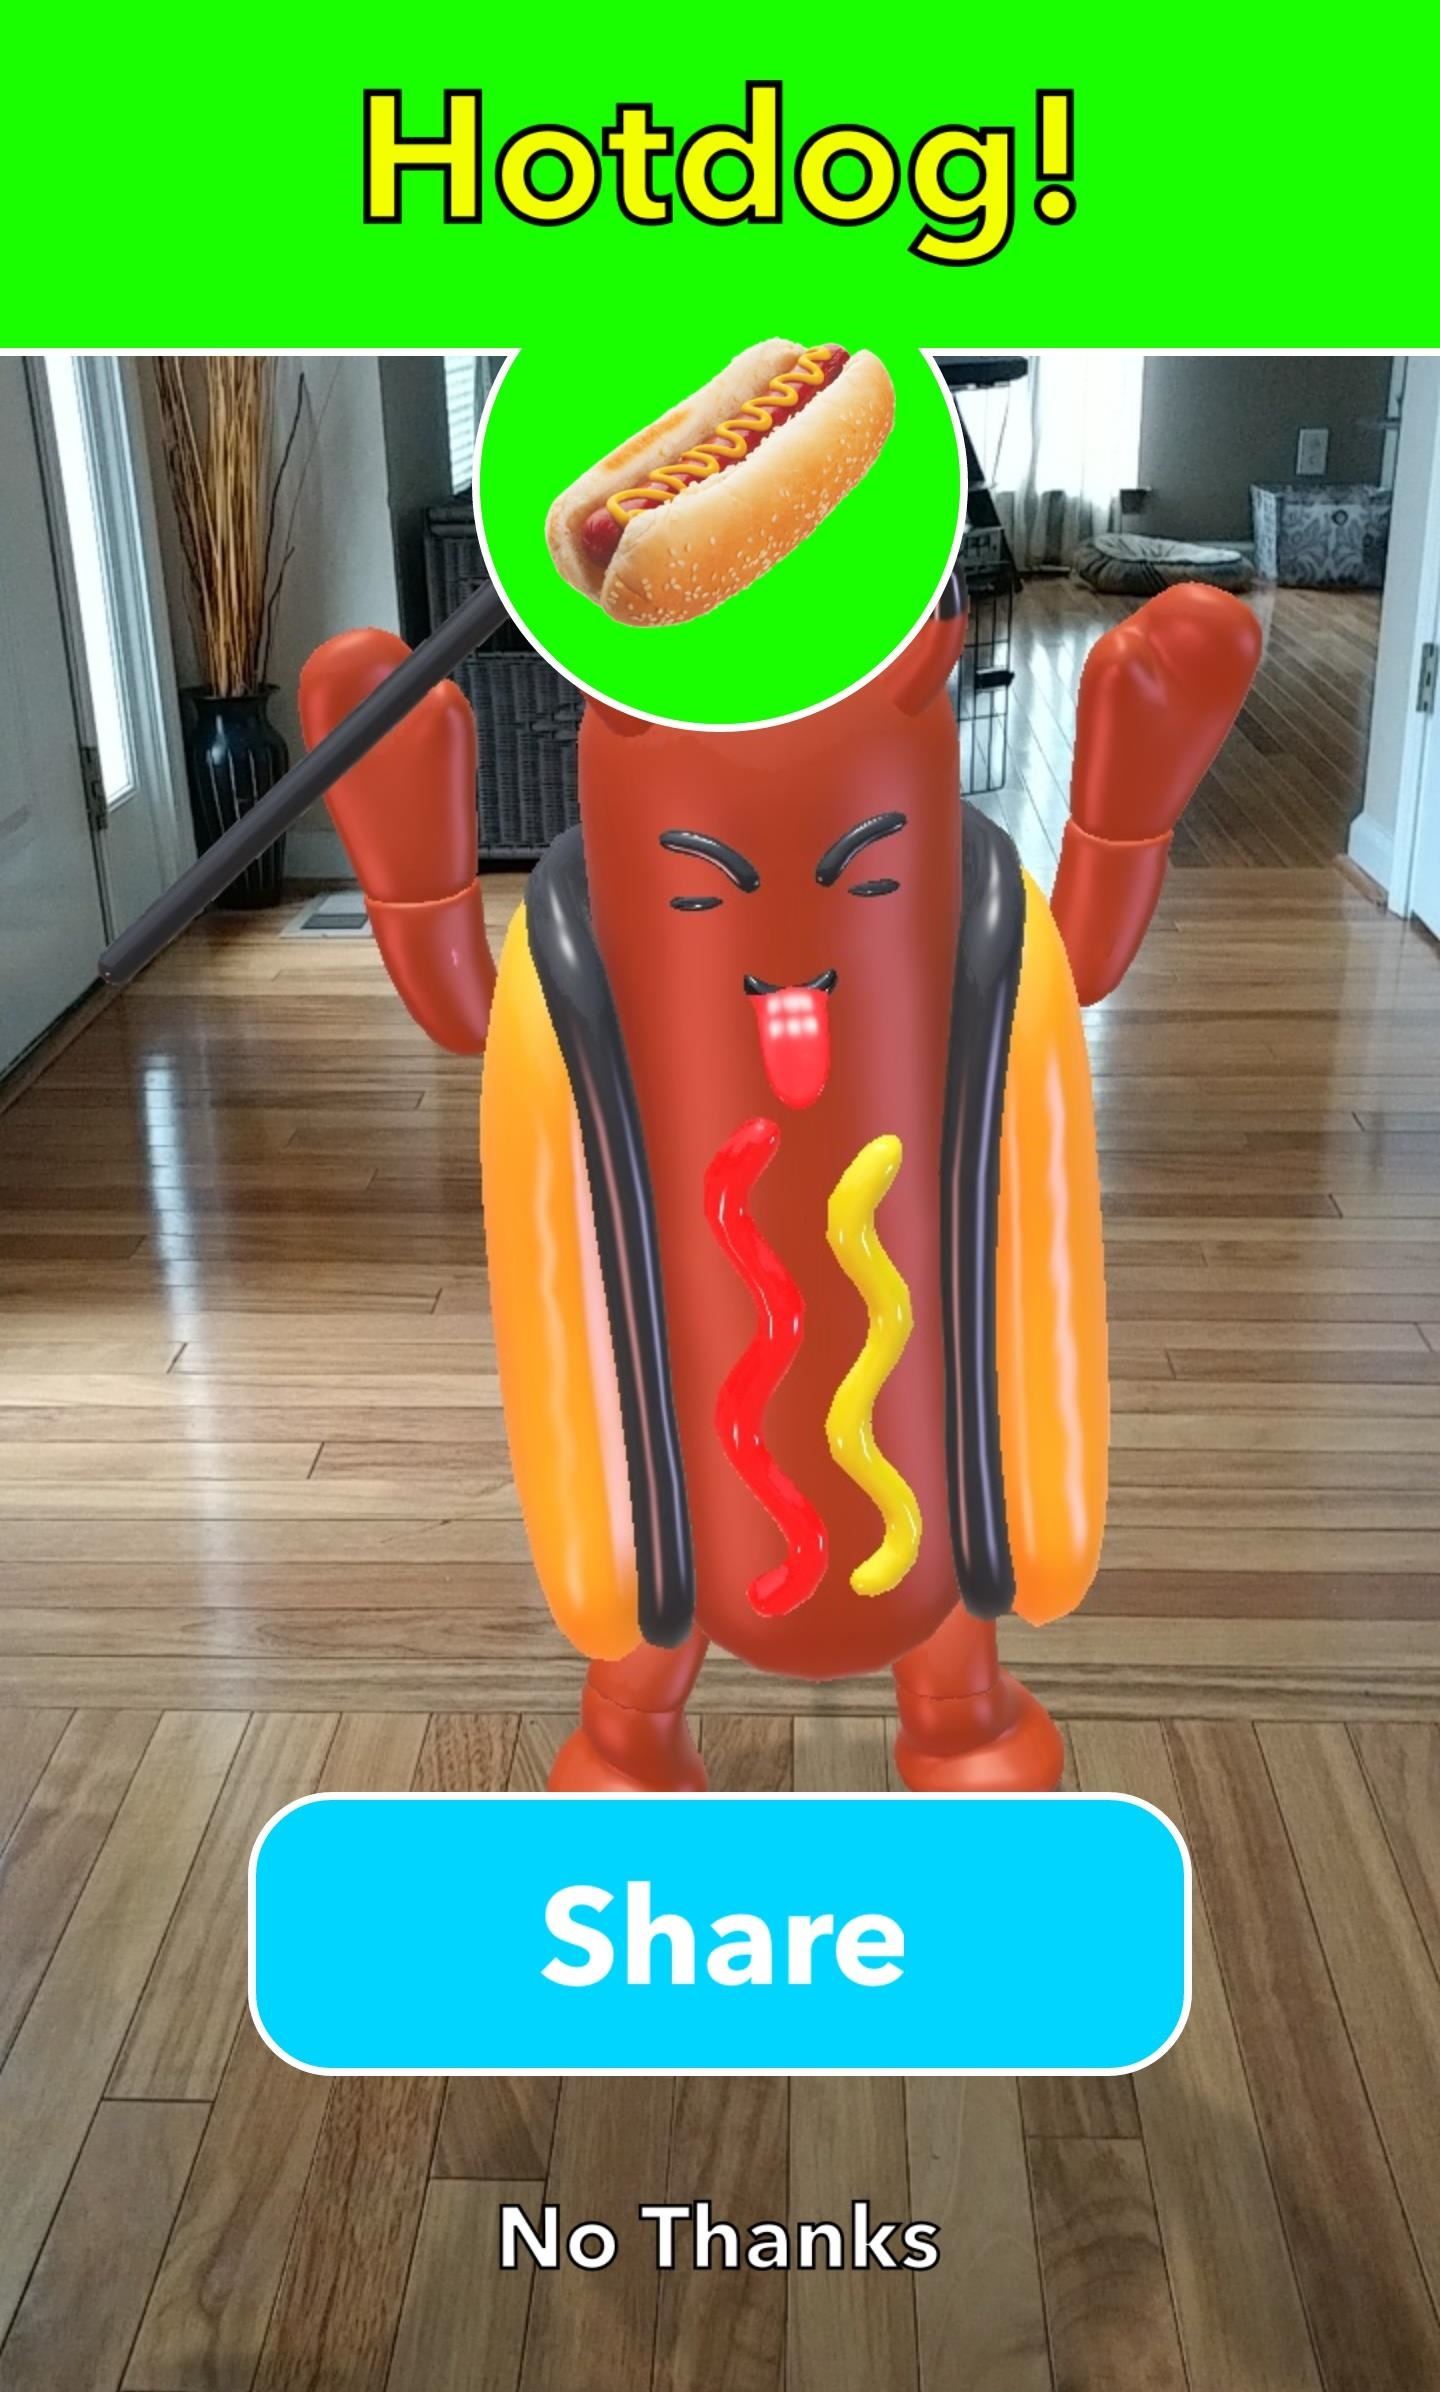 Snapchat Proves That No One Can Agree on How to Assemble a Burger